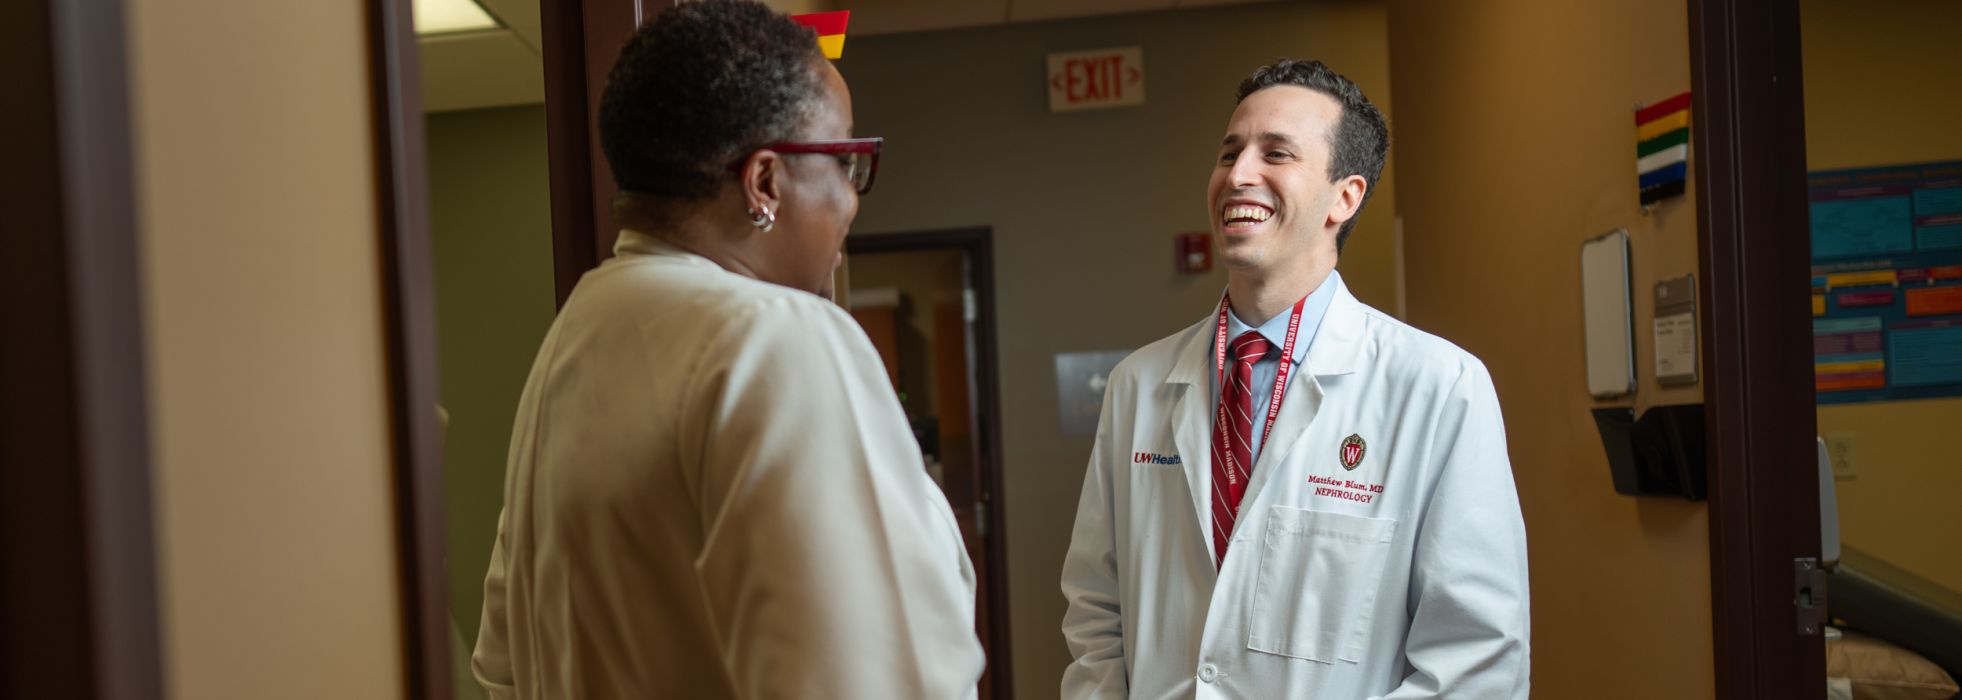 Dr. Matthew Blum and Amaka Achufusi laugh together in a clinic hallway